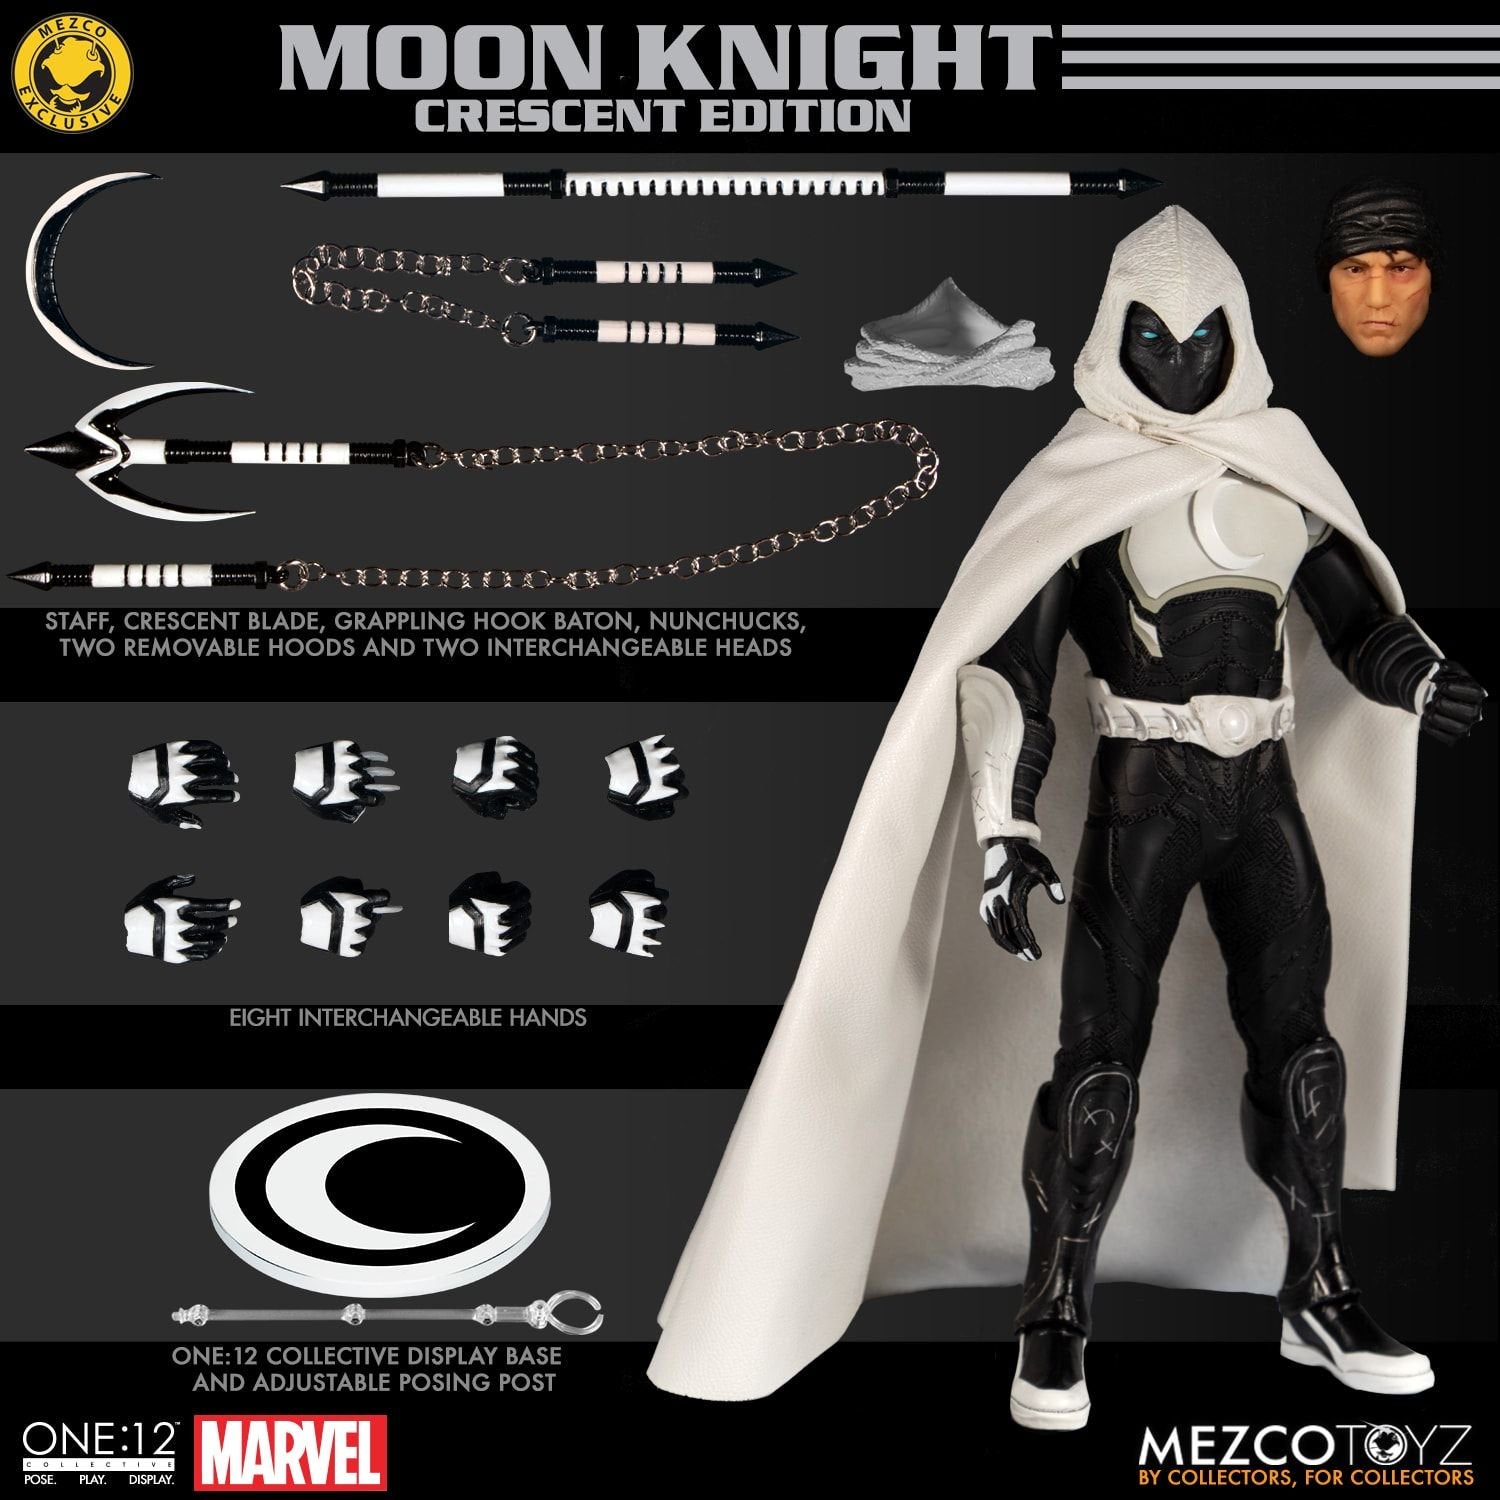 SDCC 2019 Mezco Toyz ONE:12 Moon Knight Crescent Edition Exclusive Action Figure